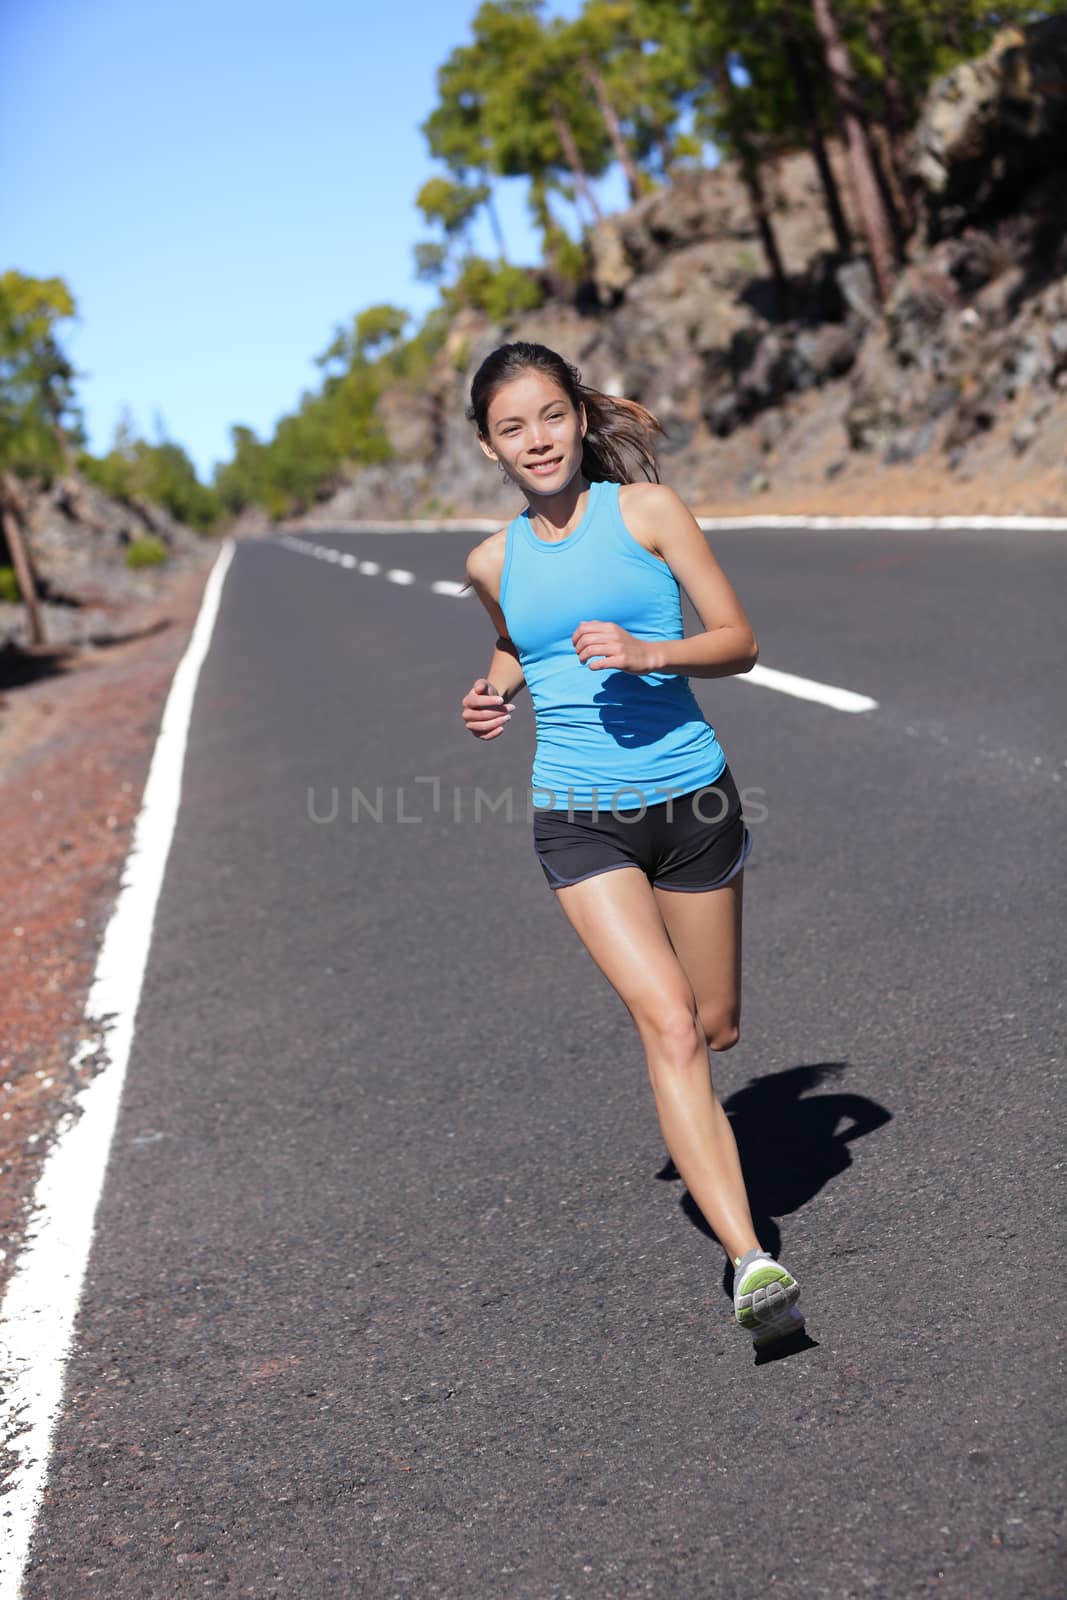 Female road runner training running in outdoor nature. Asian woman jogging fast working out her cardio in blue top and black shorts activewear. by Maridav